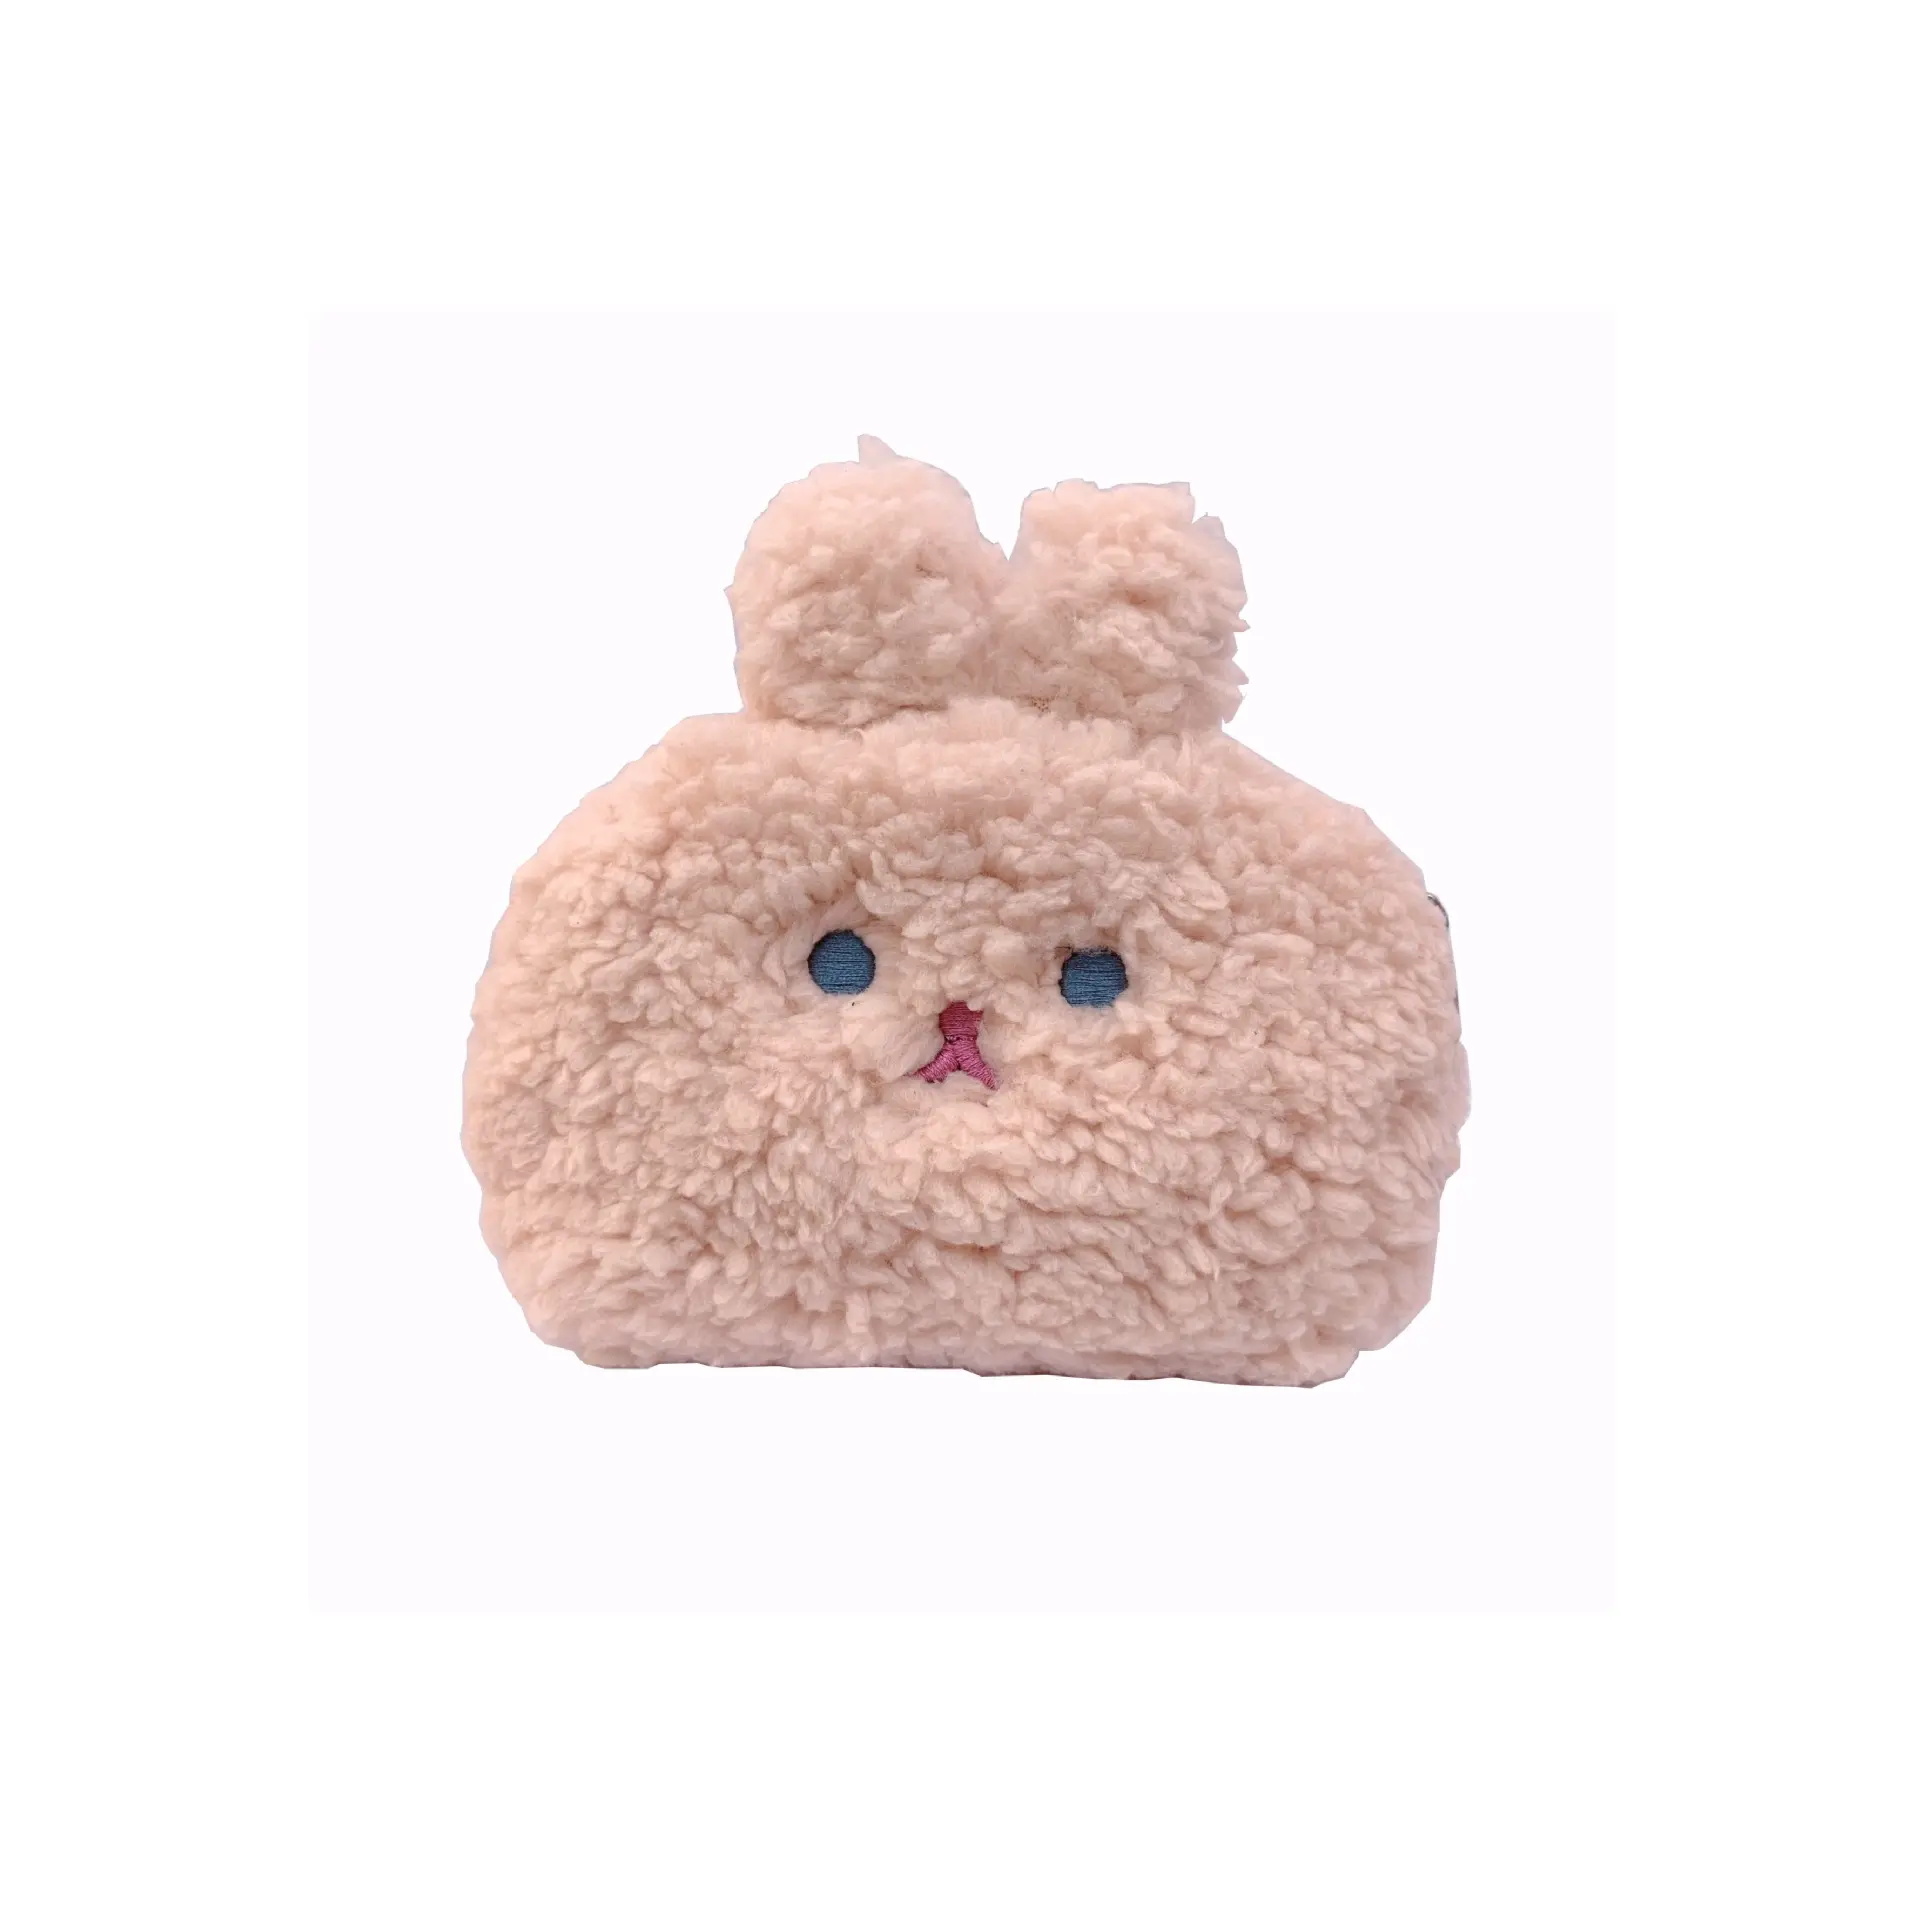 cheap cute animal embroidery rabbit gift plush mini coin purse wallet key holder girl kid toy